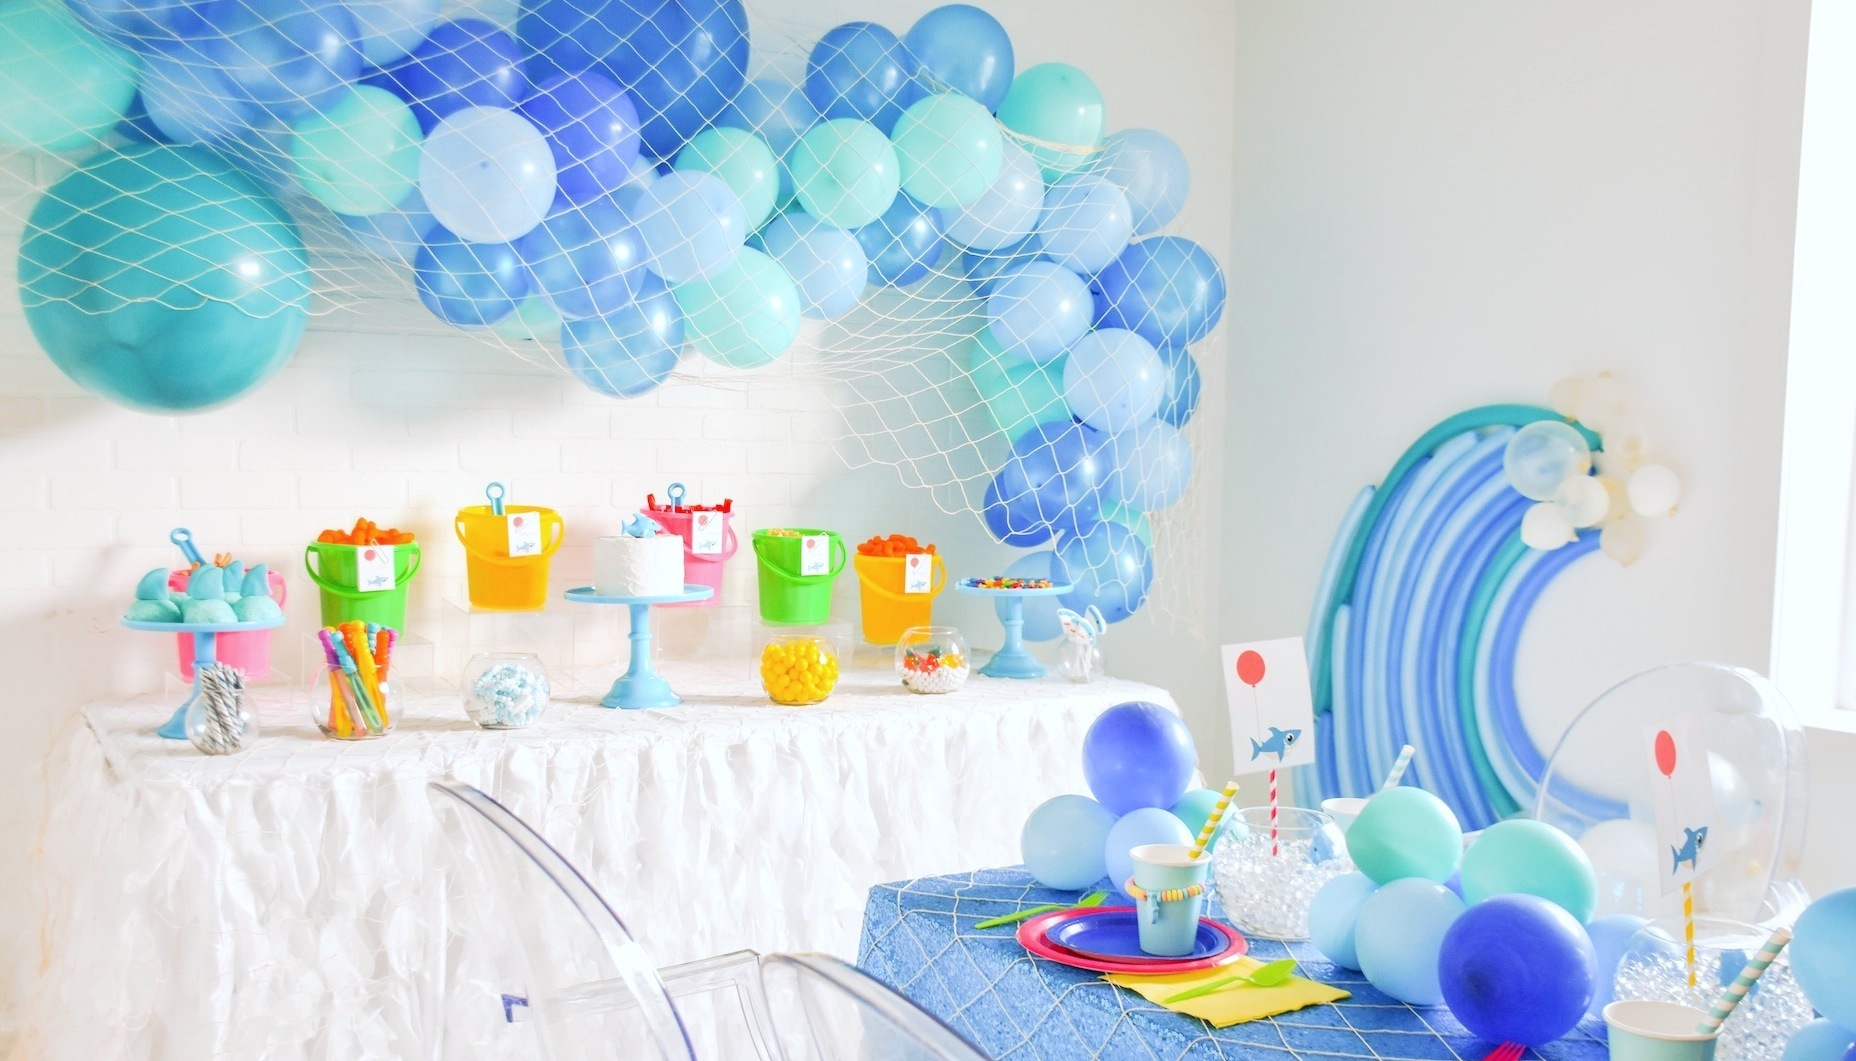 Ceiling Decoration 32 Pcs Shark Hanging Swirls Decorations for Boys Girls Home Classroom Baby Shower Decorations Under the Sea Baby Shark Birthday Party Supplies for Birthday Party